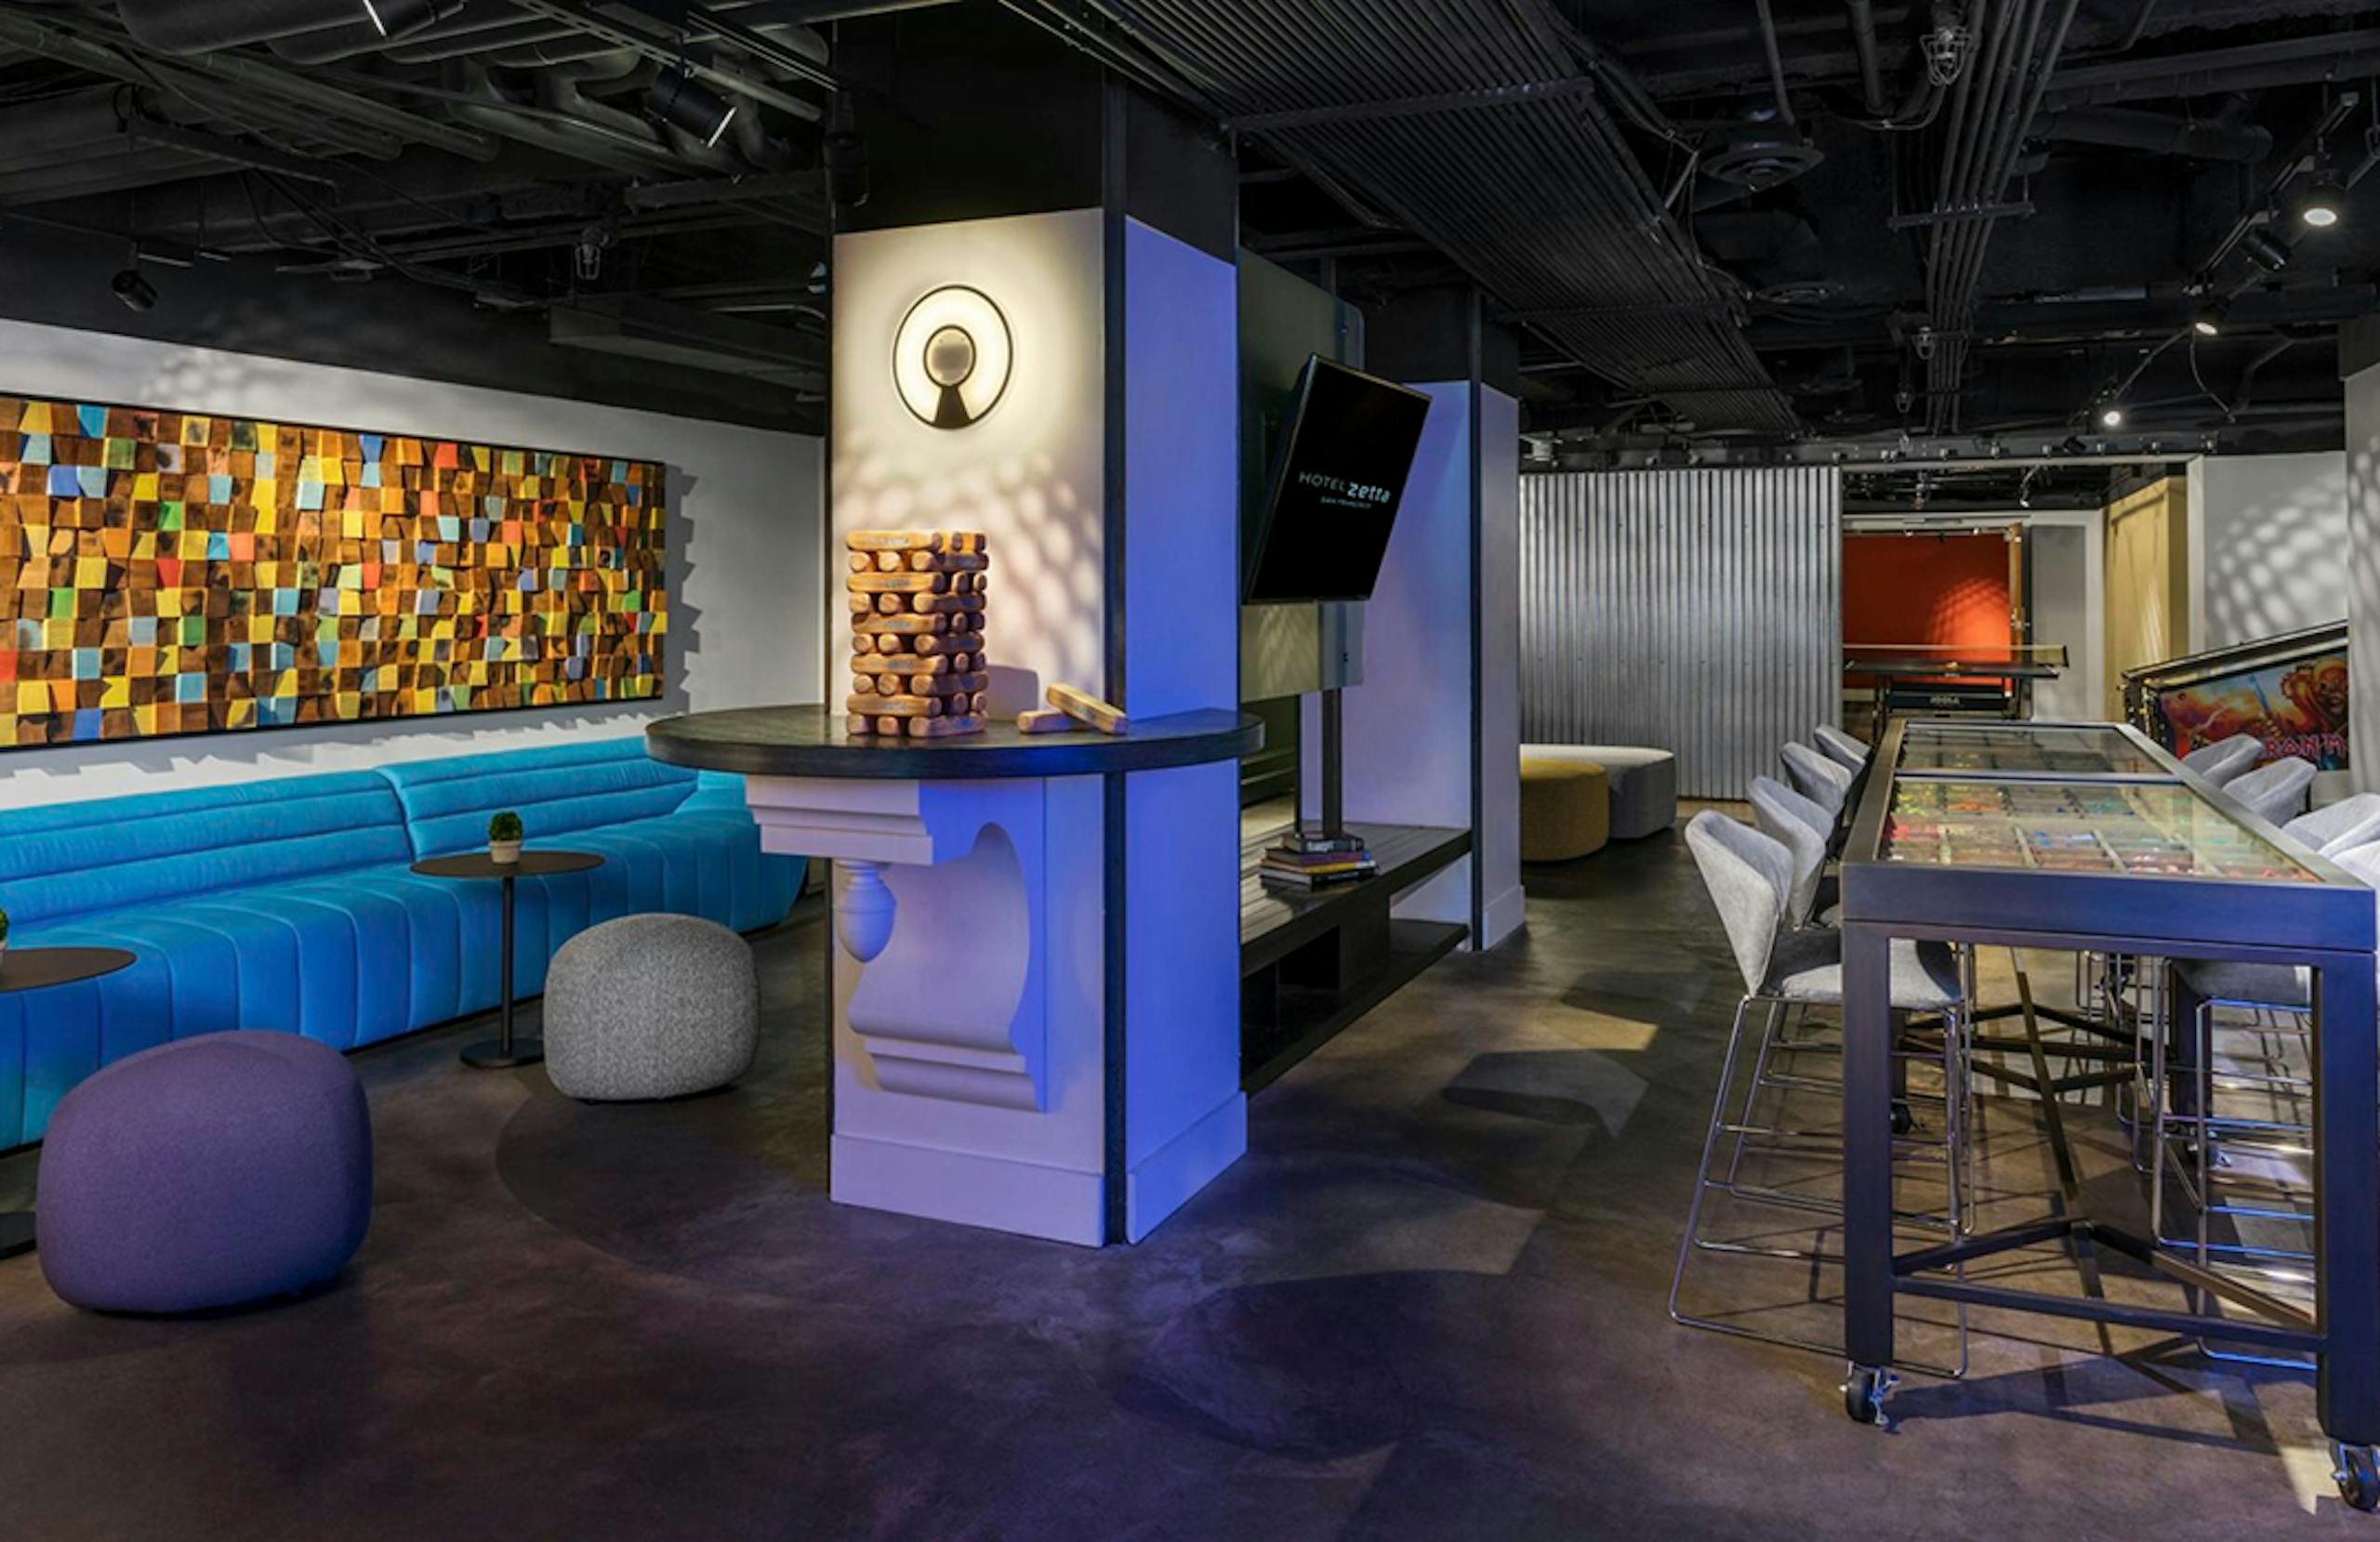 Play room with large jenga tower, bar seating, and booths